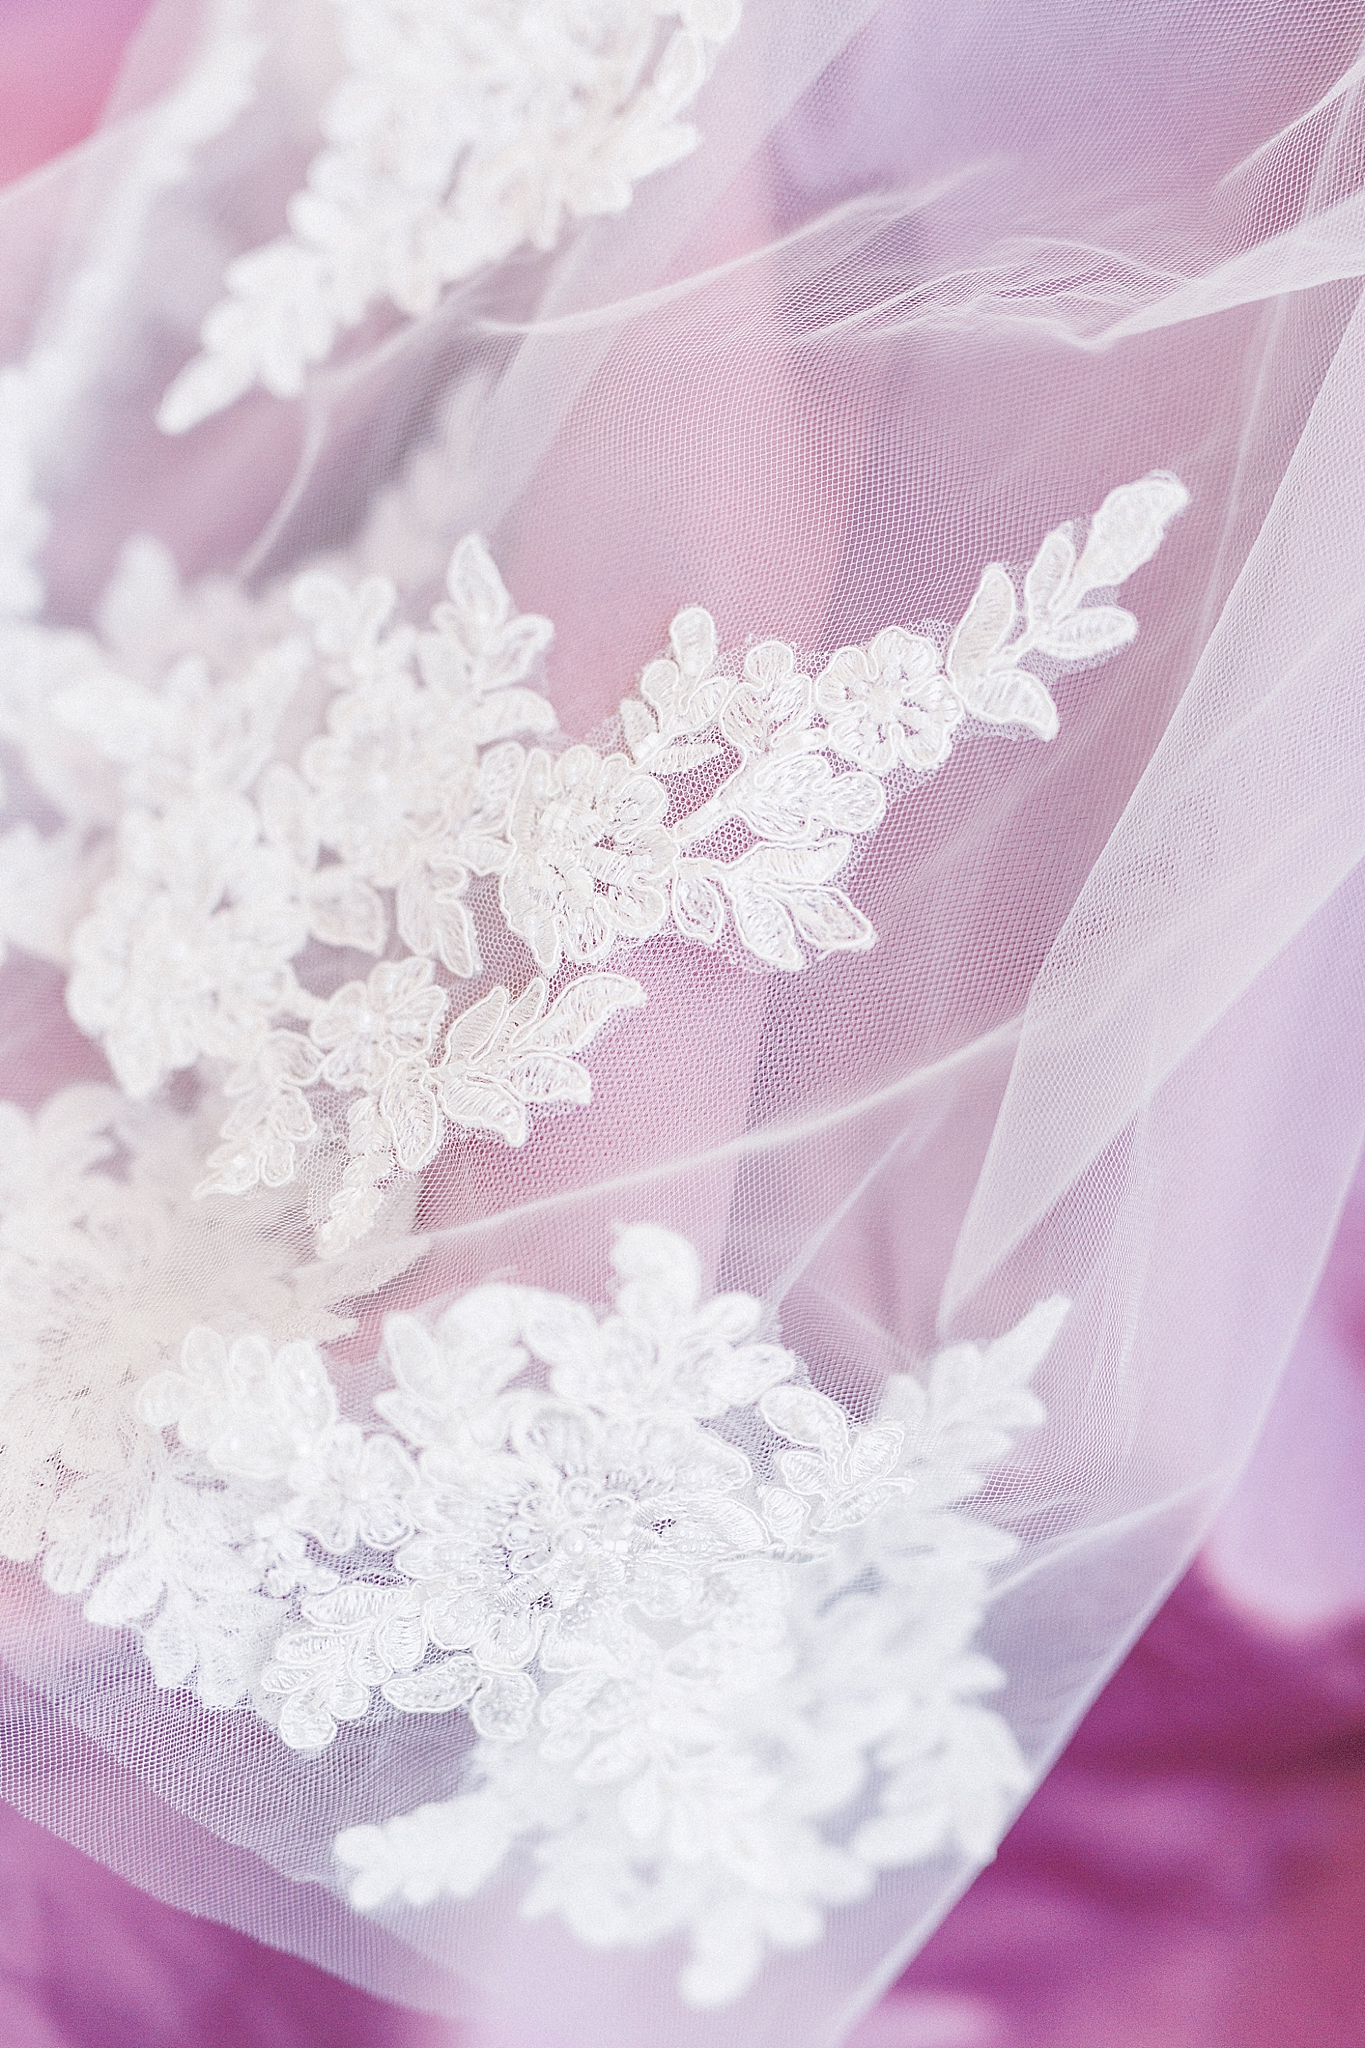 lace from bride's veil lays on pink fabric